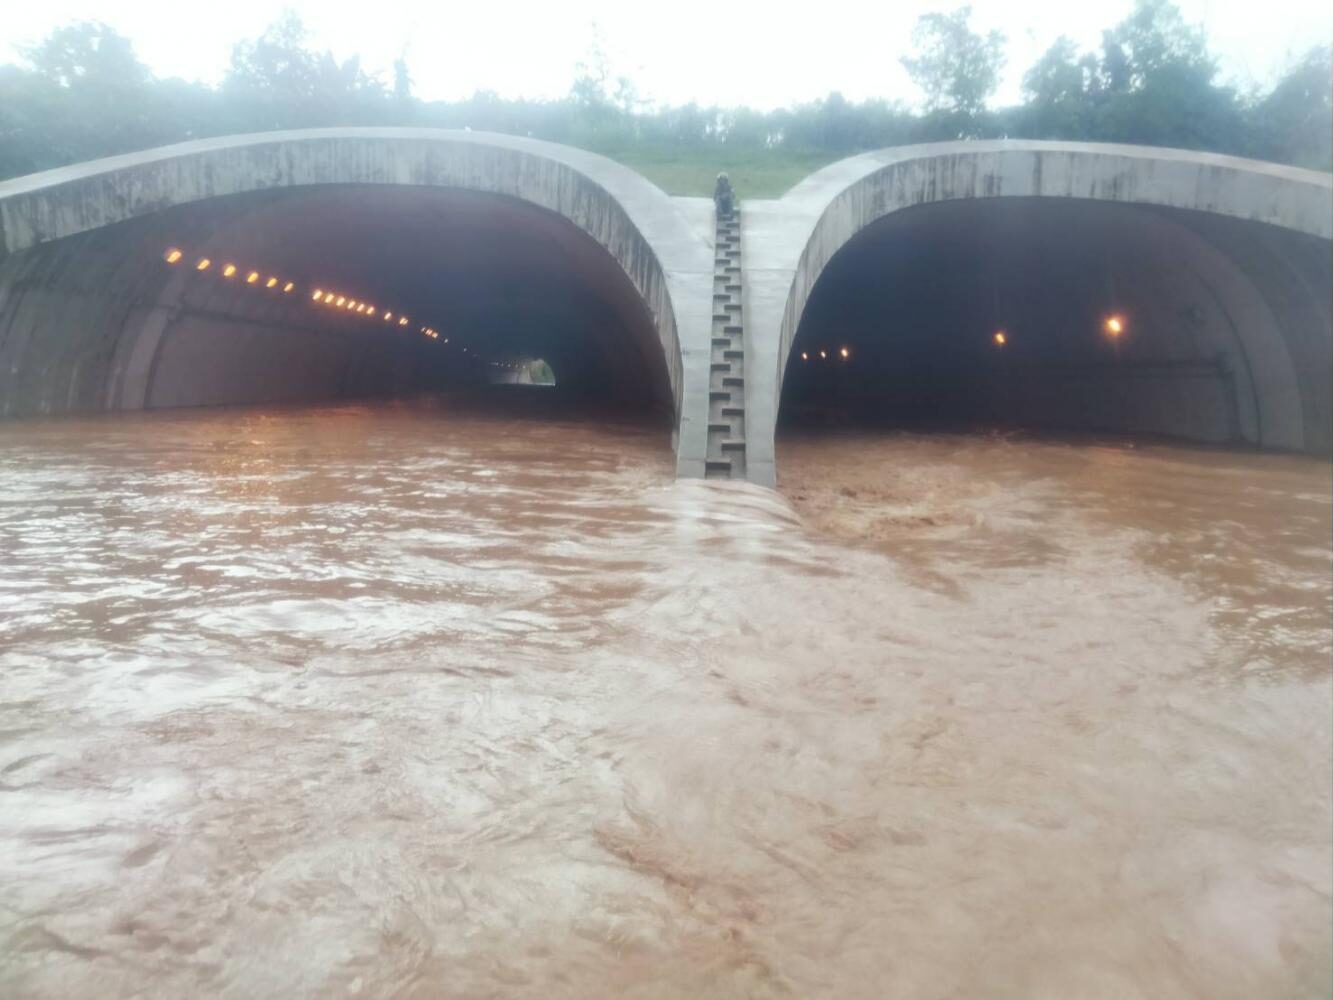 A tunnel linking the Khao Yai and Thap Lan national parks on Highway 304 between Kabin Buri district in Prachin Buri and Pak Thong Chai district in Nakhon Ratchasima was 1.8 metres under flood water yesterday morning.